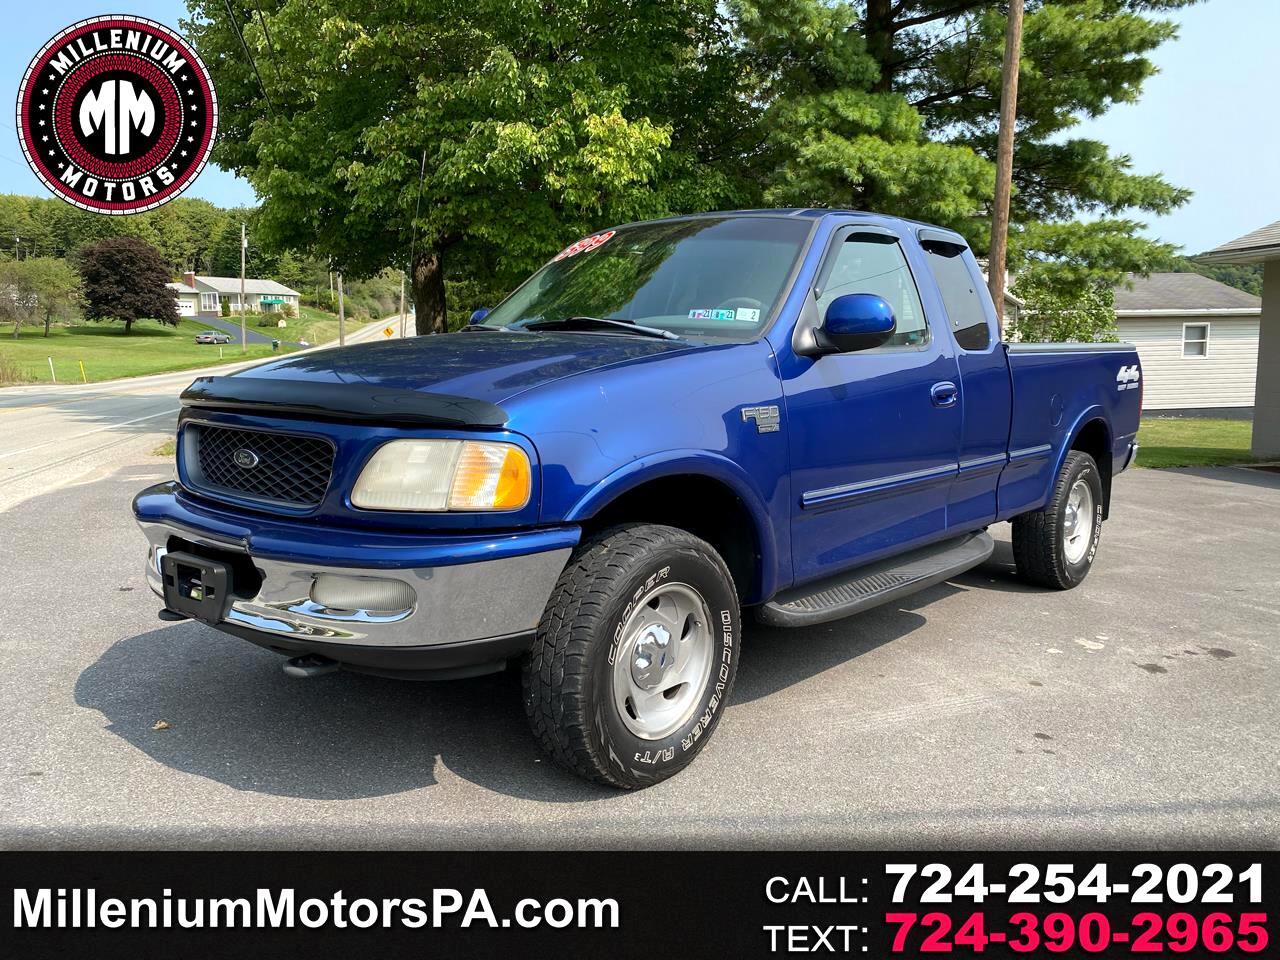 Used 1998 Ford F-150 Supercab 139" 4WD for Sale in Marion Center PA 1998 Ford F150 5.4 4x4 Towing Capacity